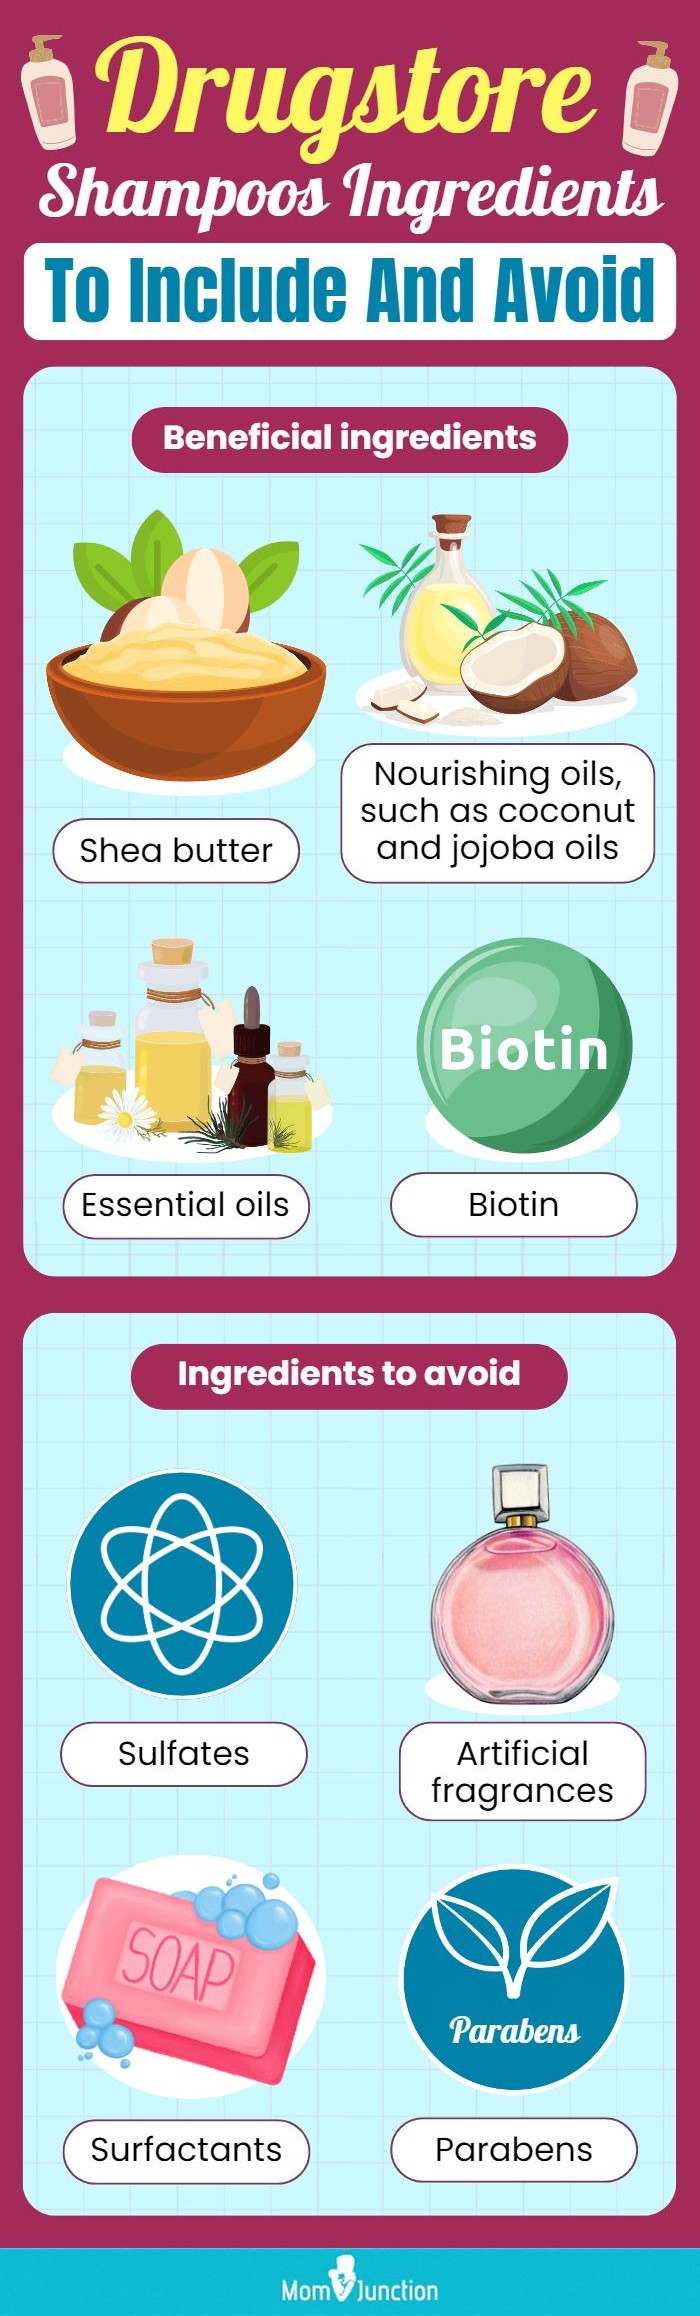 Drugstore Shampoos Ingredients To Include And Avoid (infographic)